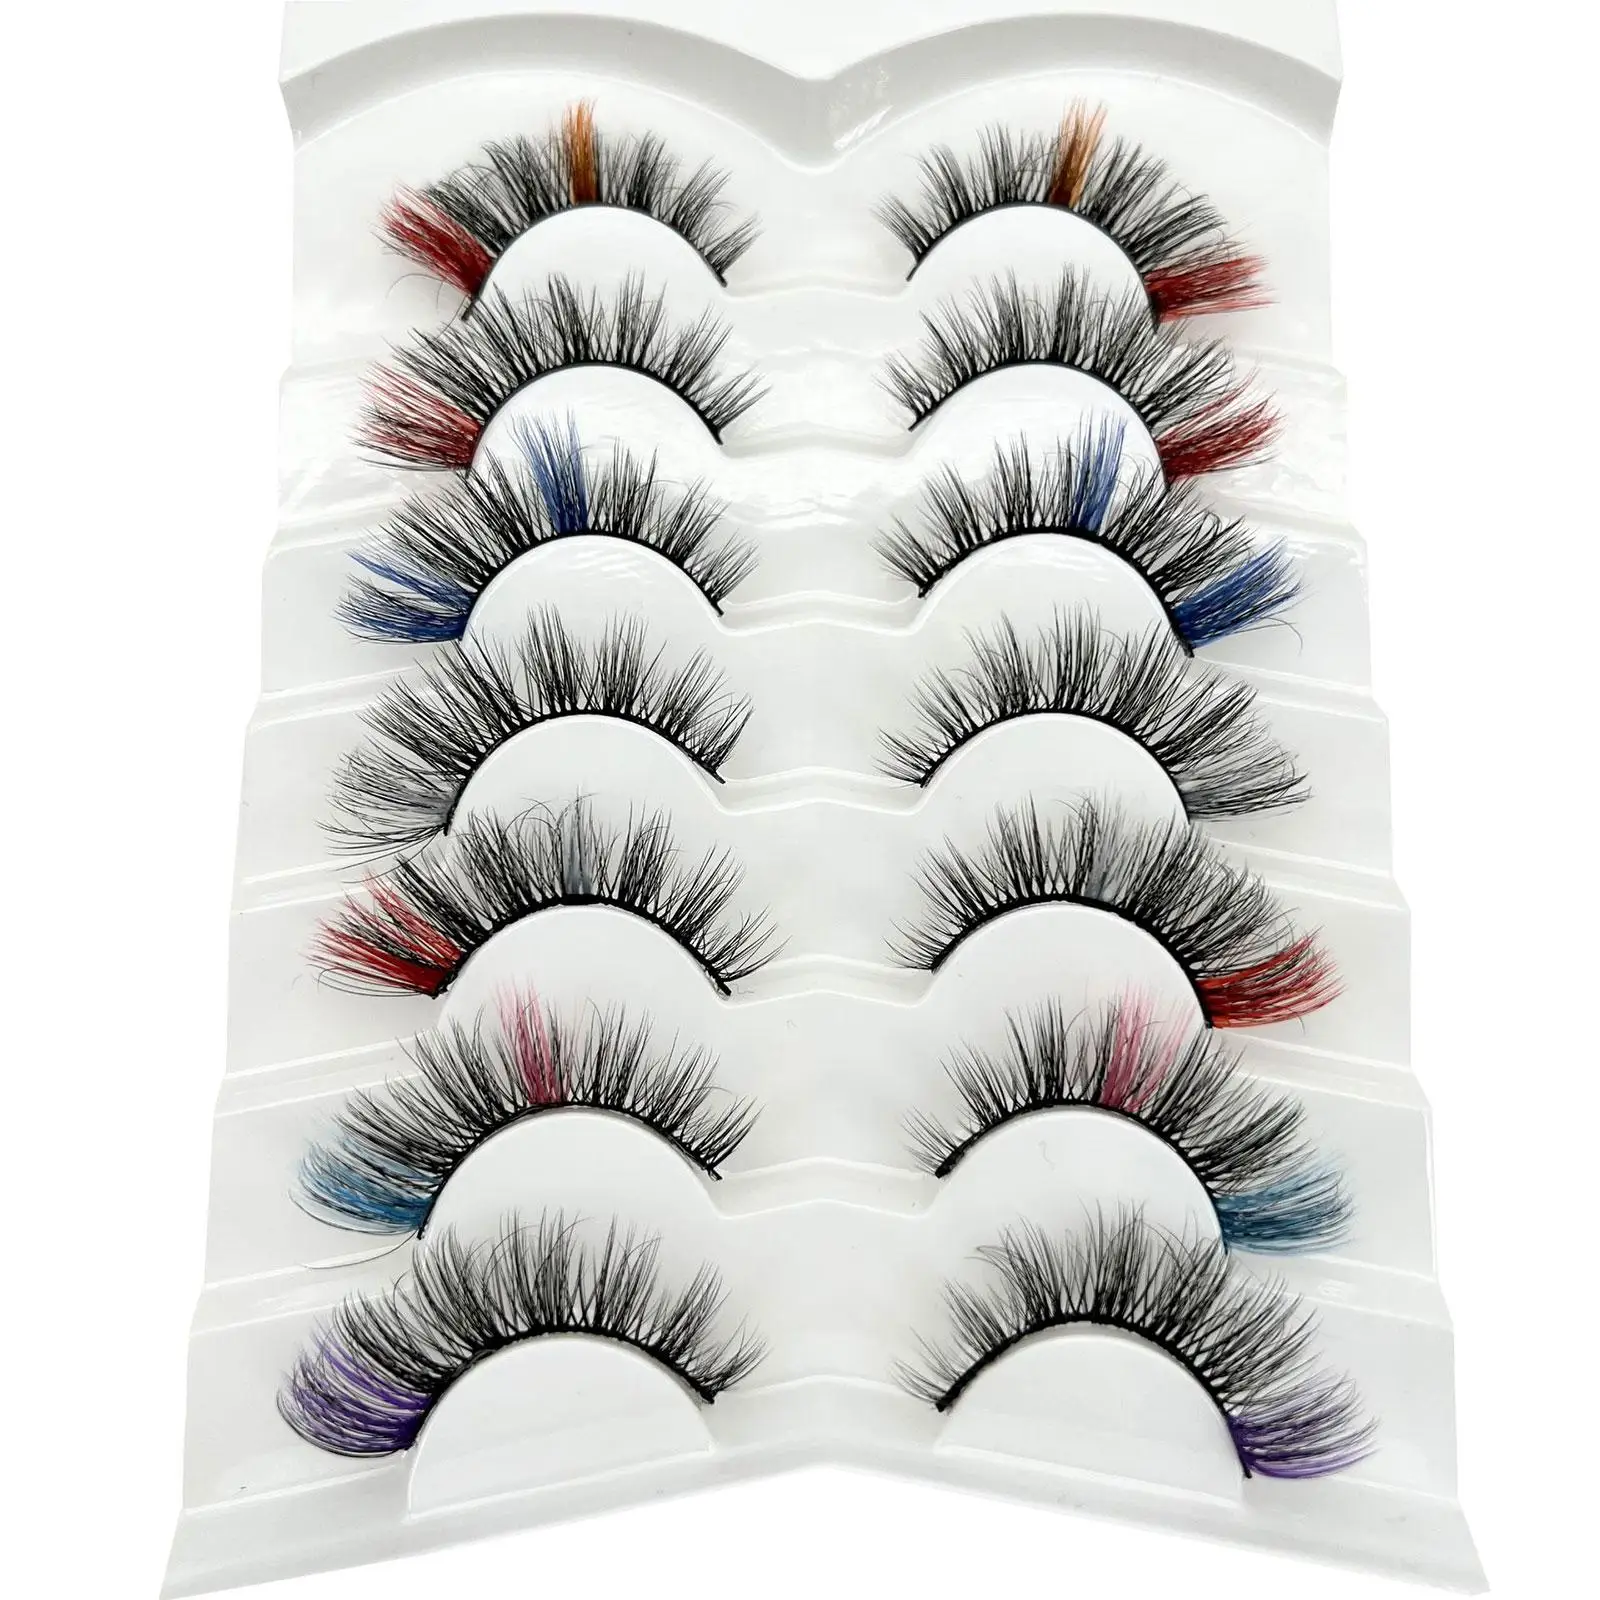 14Pcs Colored Eyelashes Makeup Eyelash Extension Soft for Costumes Parties